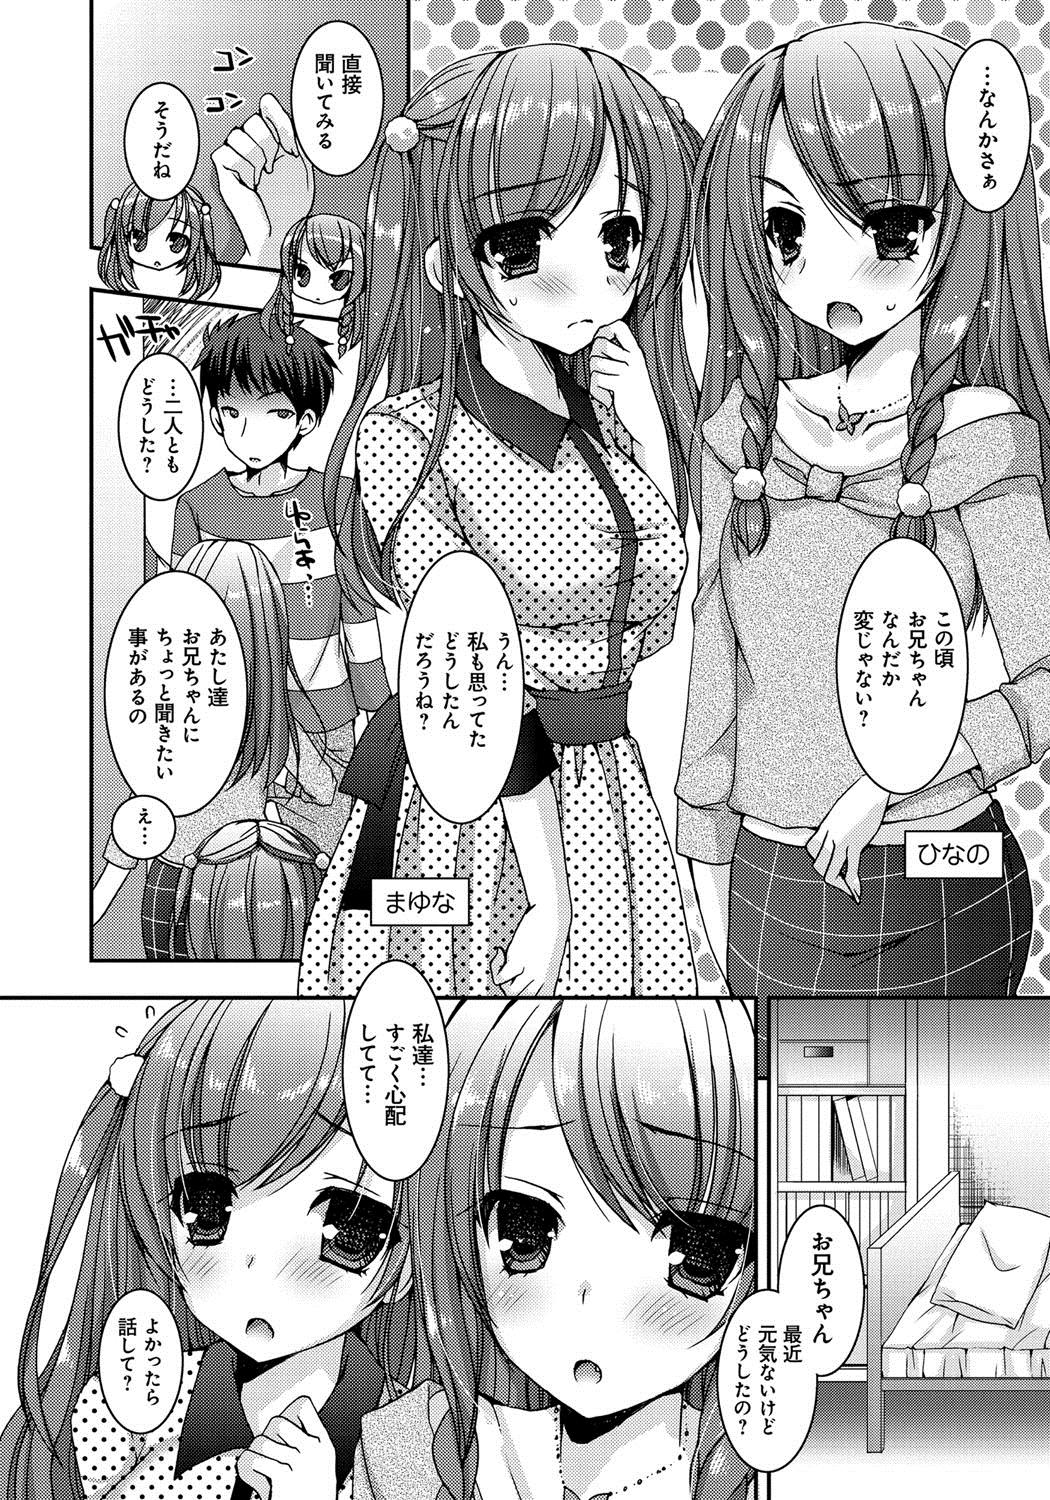 Old And Young Amai Shimai - The Sisters so Sweet Softcore - Page 5